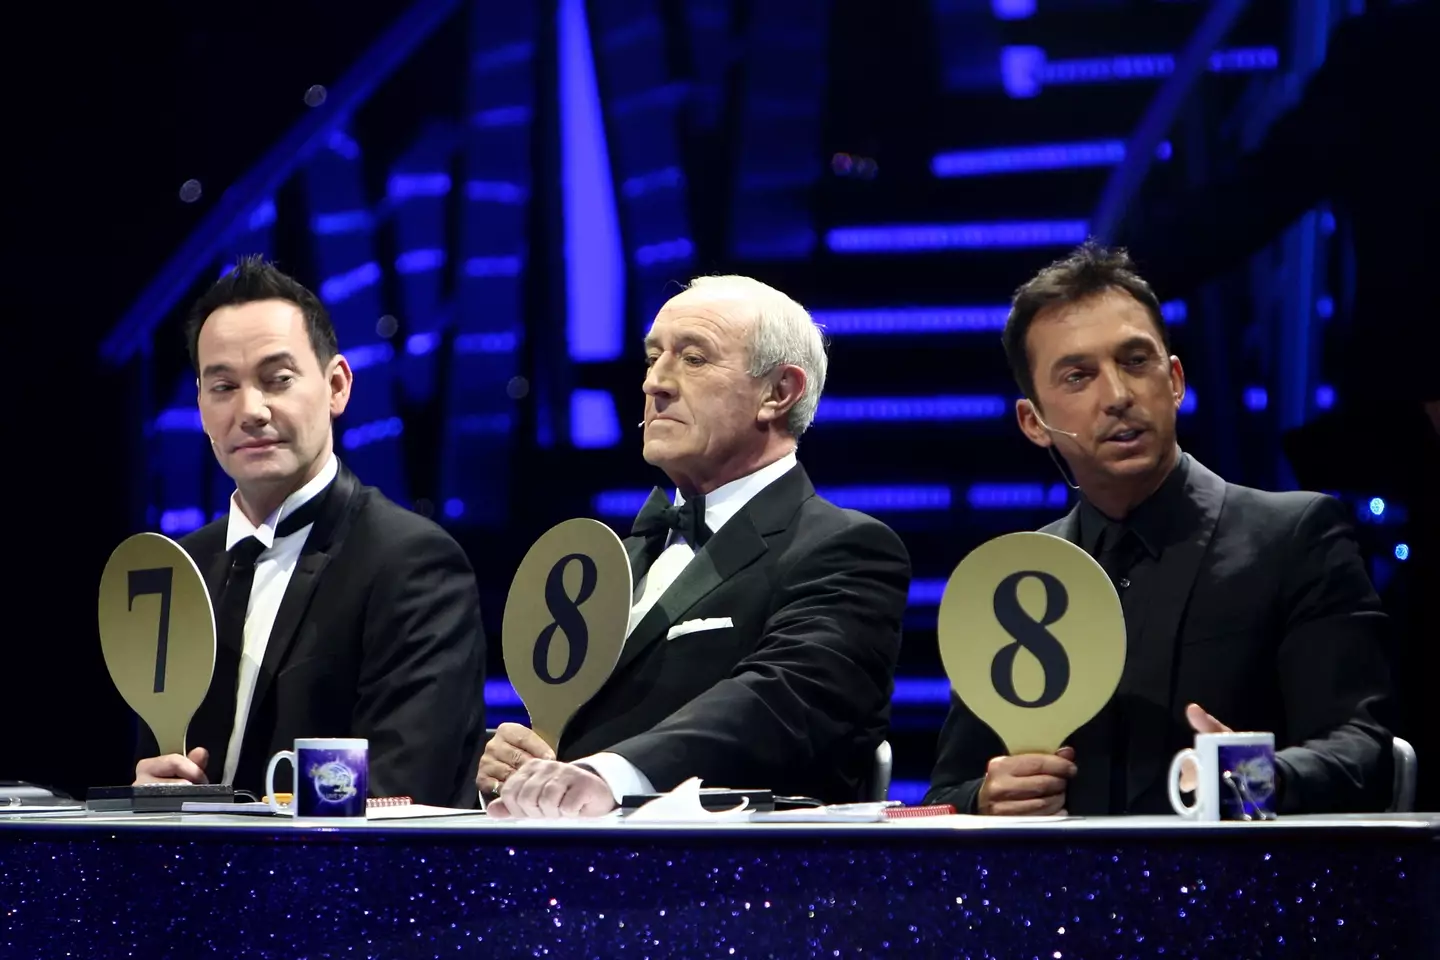 The Strictly judge - who appeared on the show from 2004 to 2016 - was very popular with the fans after he was eventually replaced by Shirley Ballas.